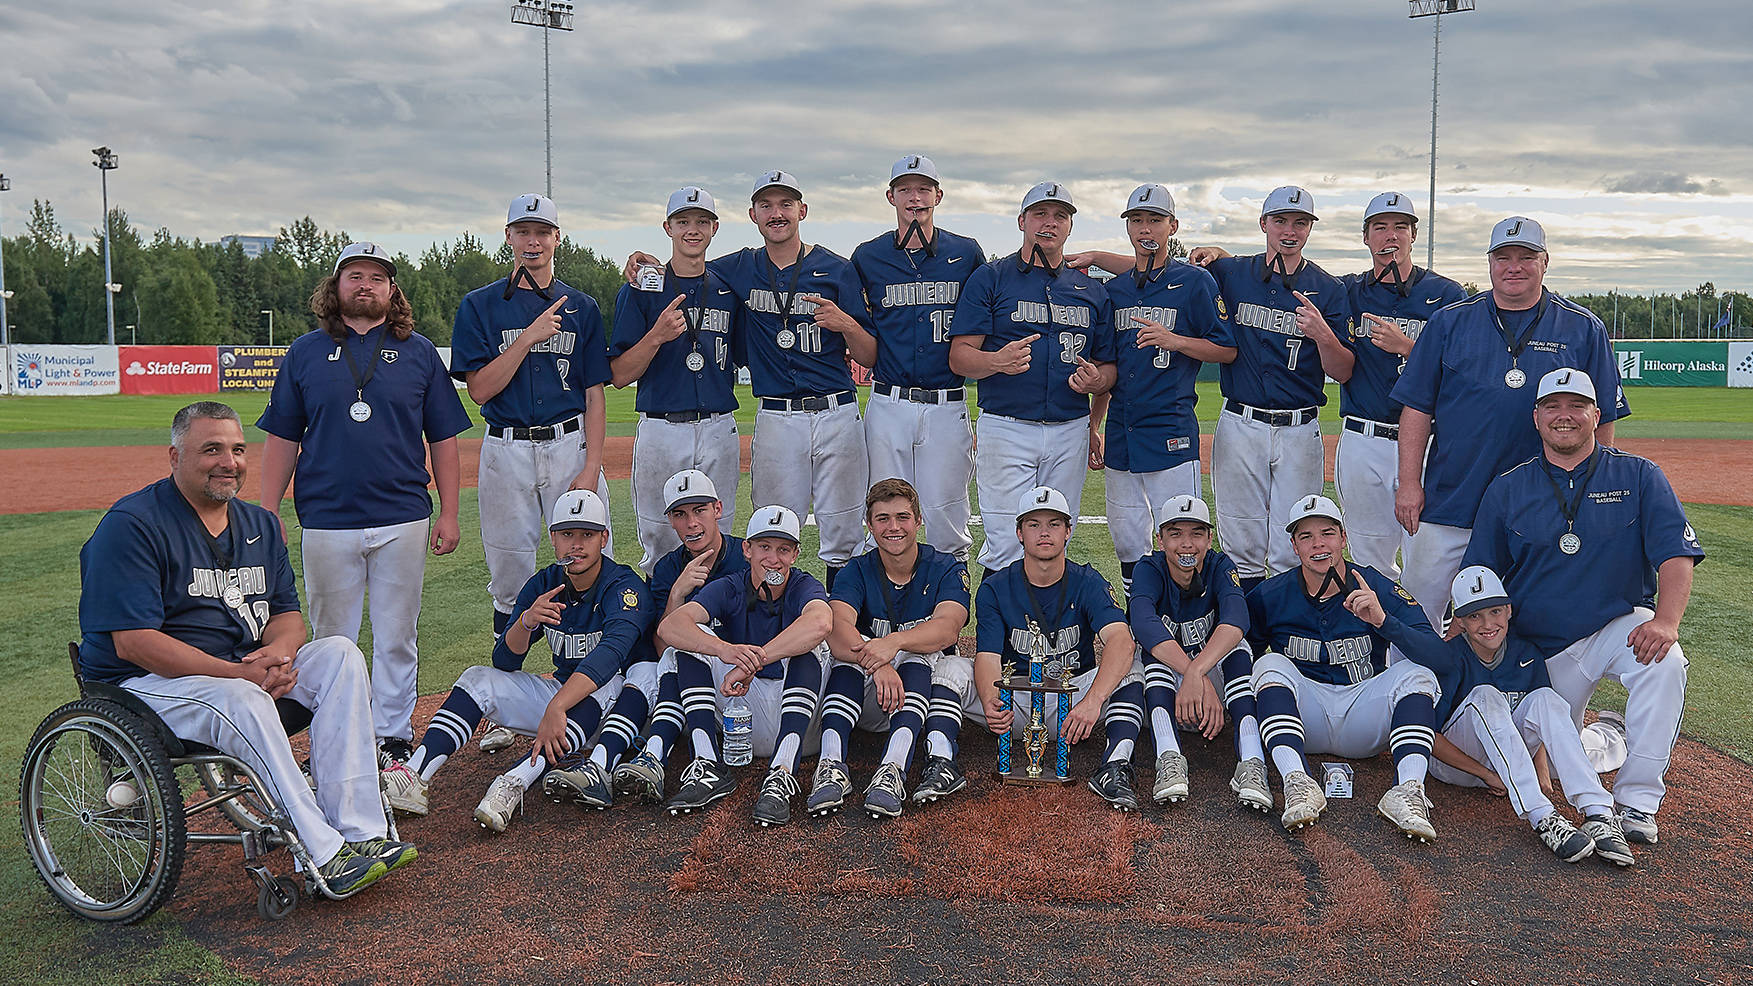 Juneau Post 25 won its second consecutive state tournament on Tuesday, defeating Dimond Post 21, 7-0. (Courtesy Photo | Jeremy Ludeman)